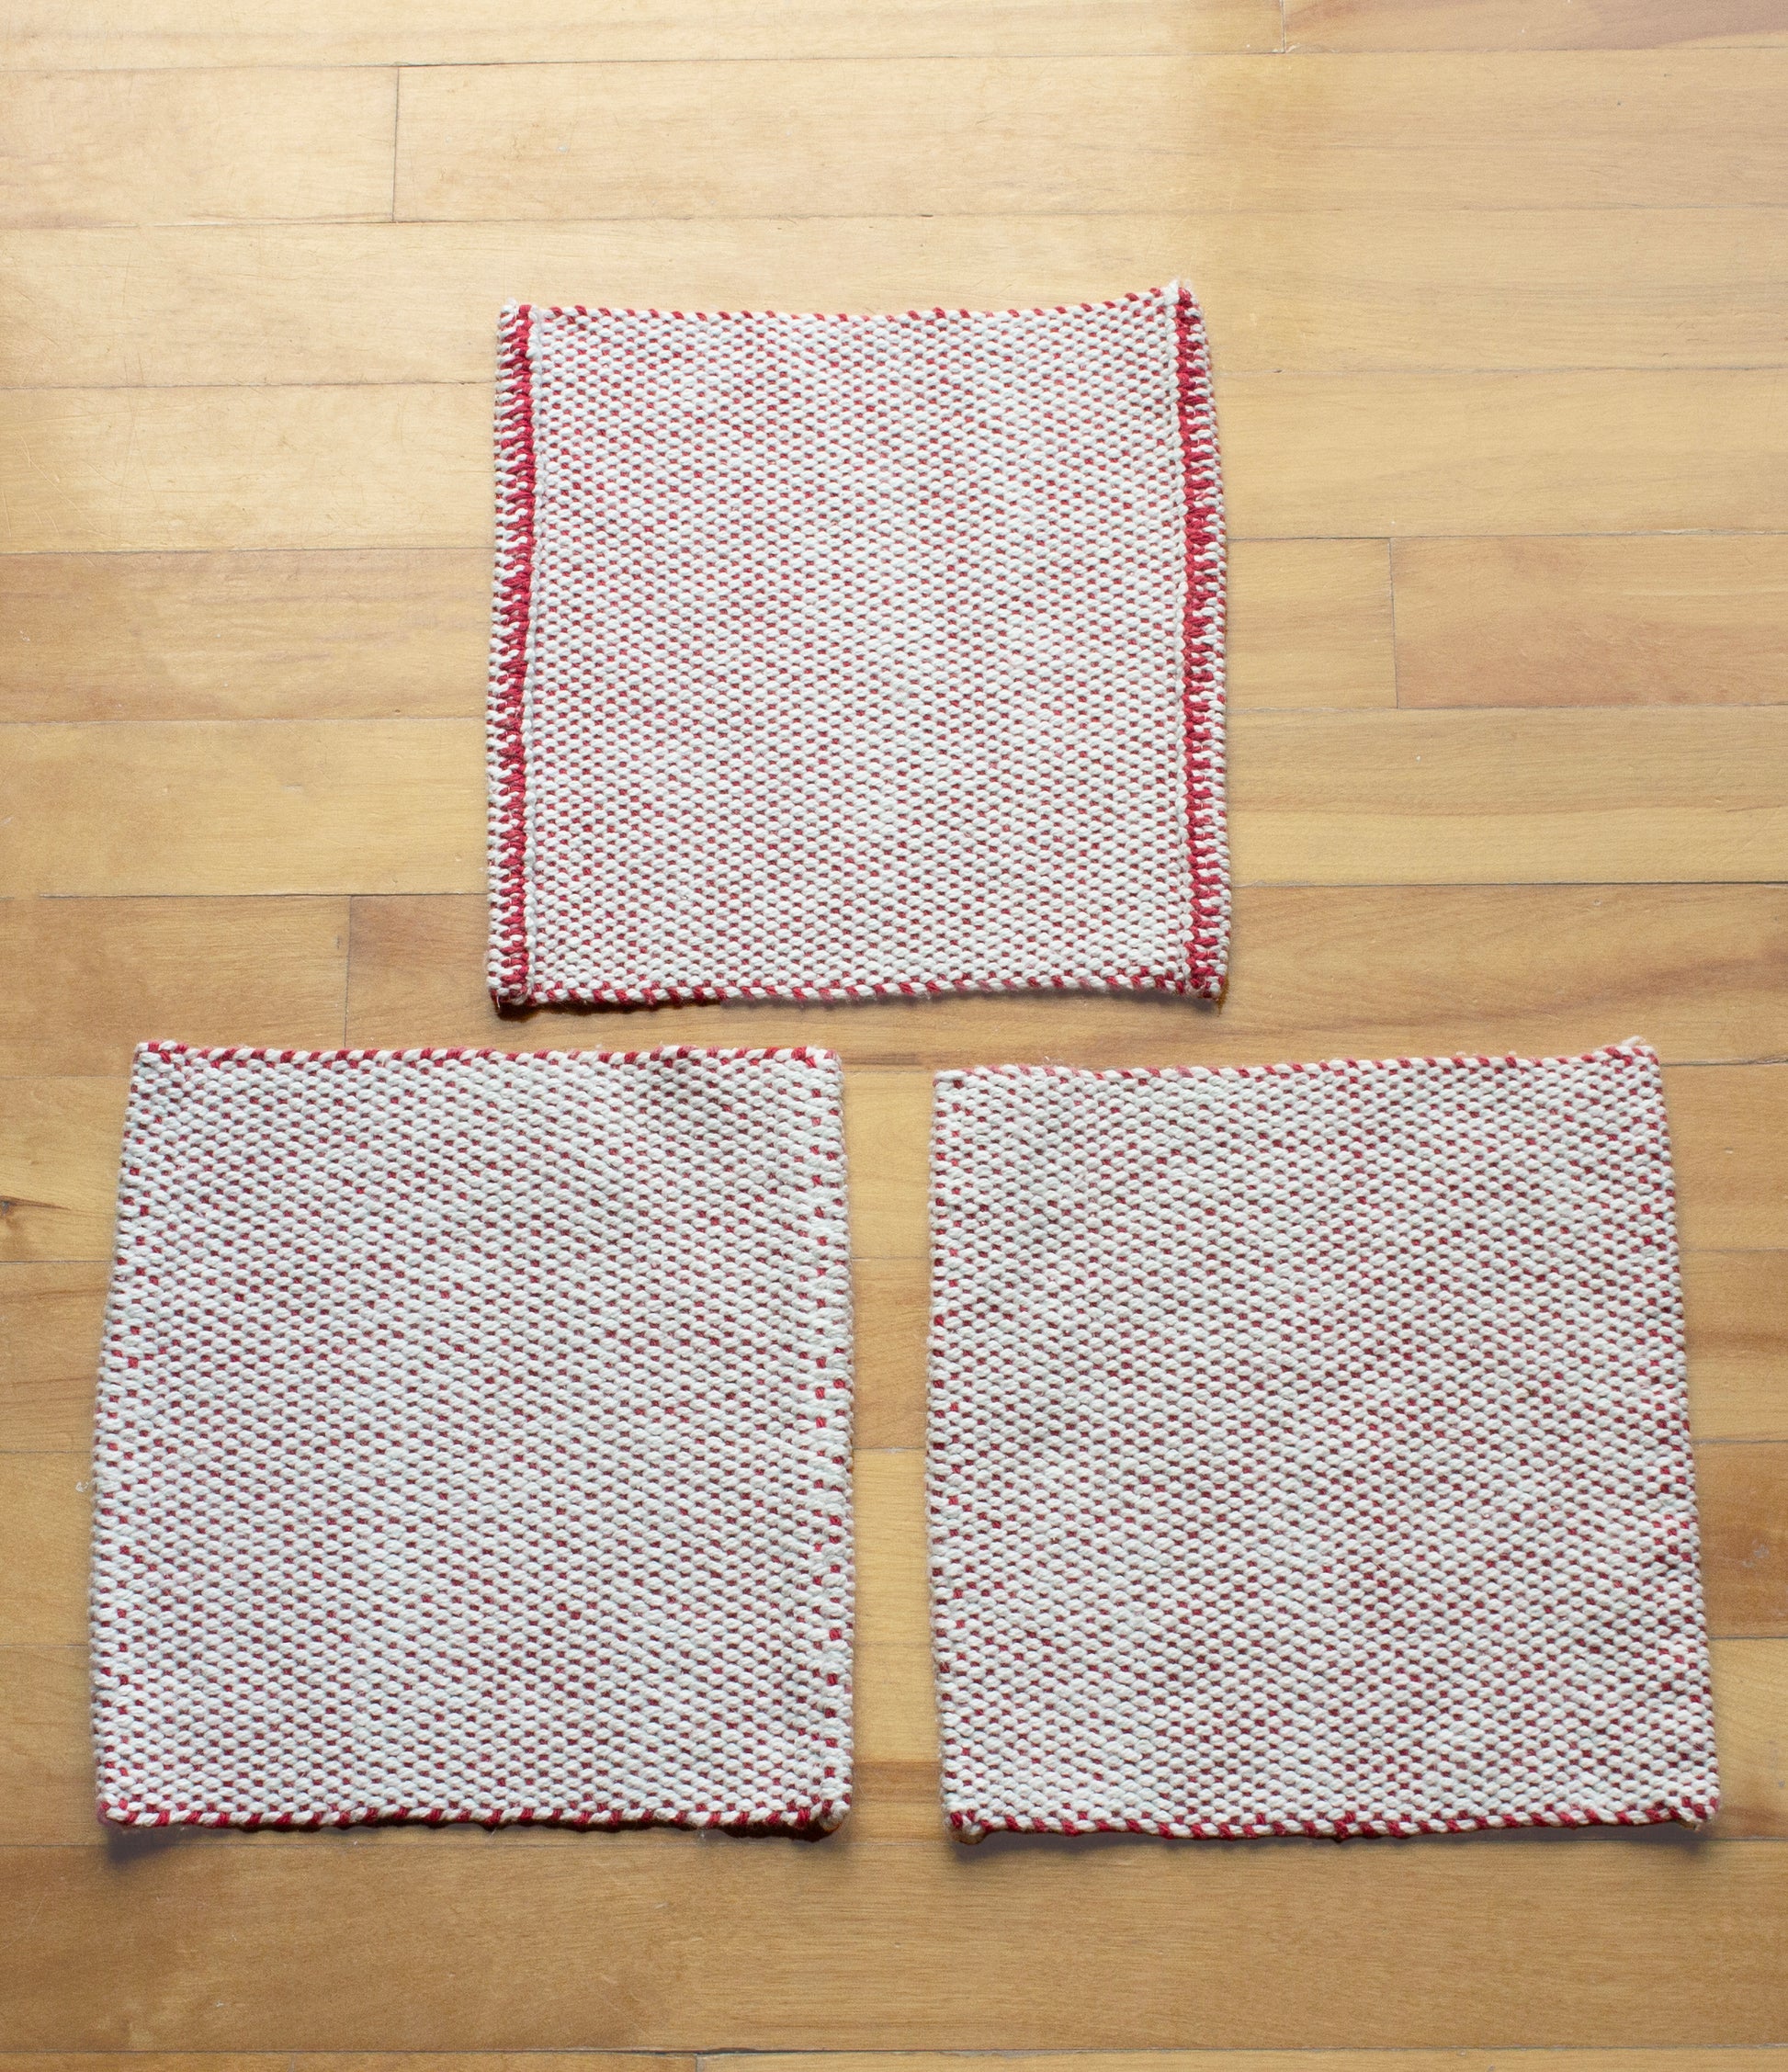 Cotton washcloth, hemmed, Red, handmade, natural fibres, washer and dryer safe, hand sewn hem, woven in Canada